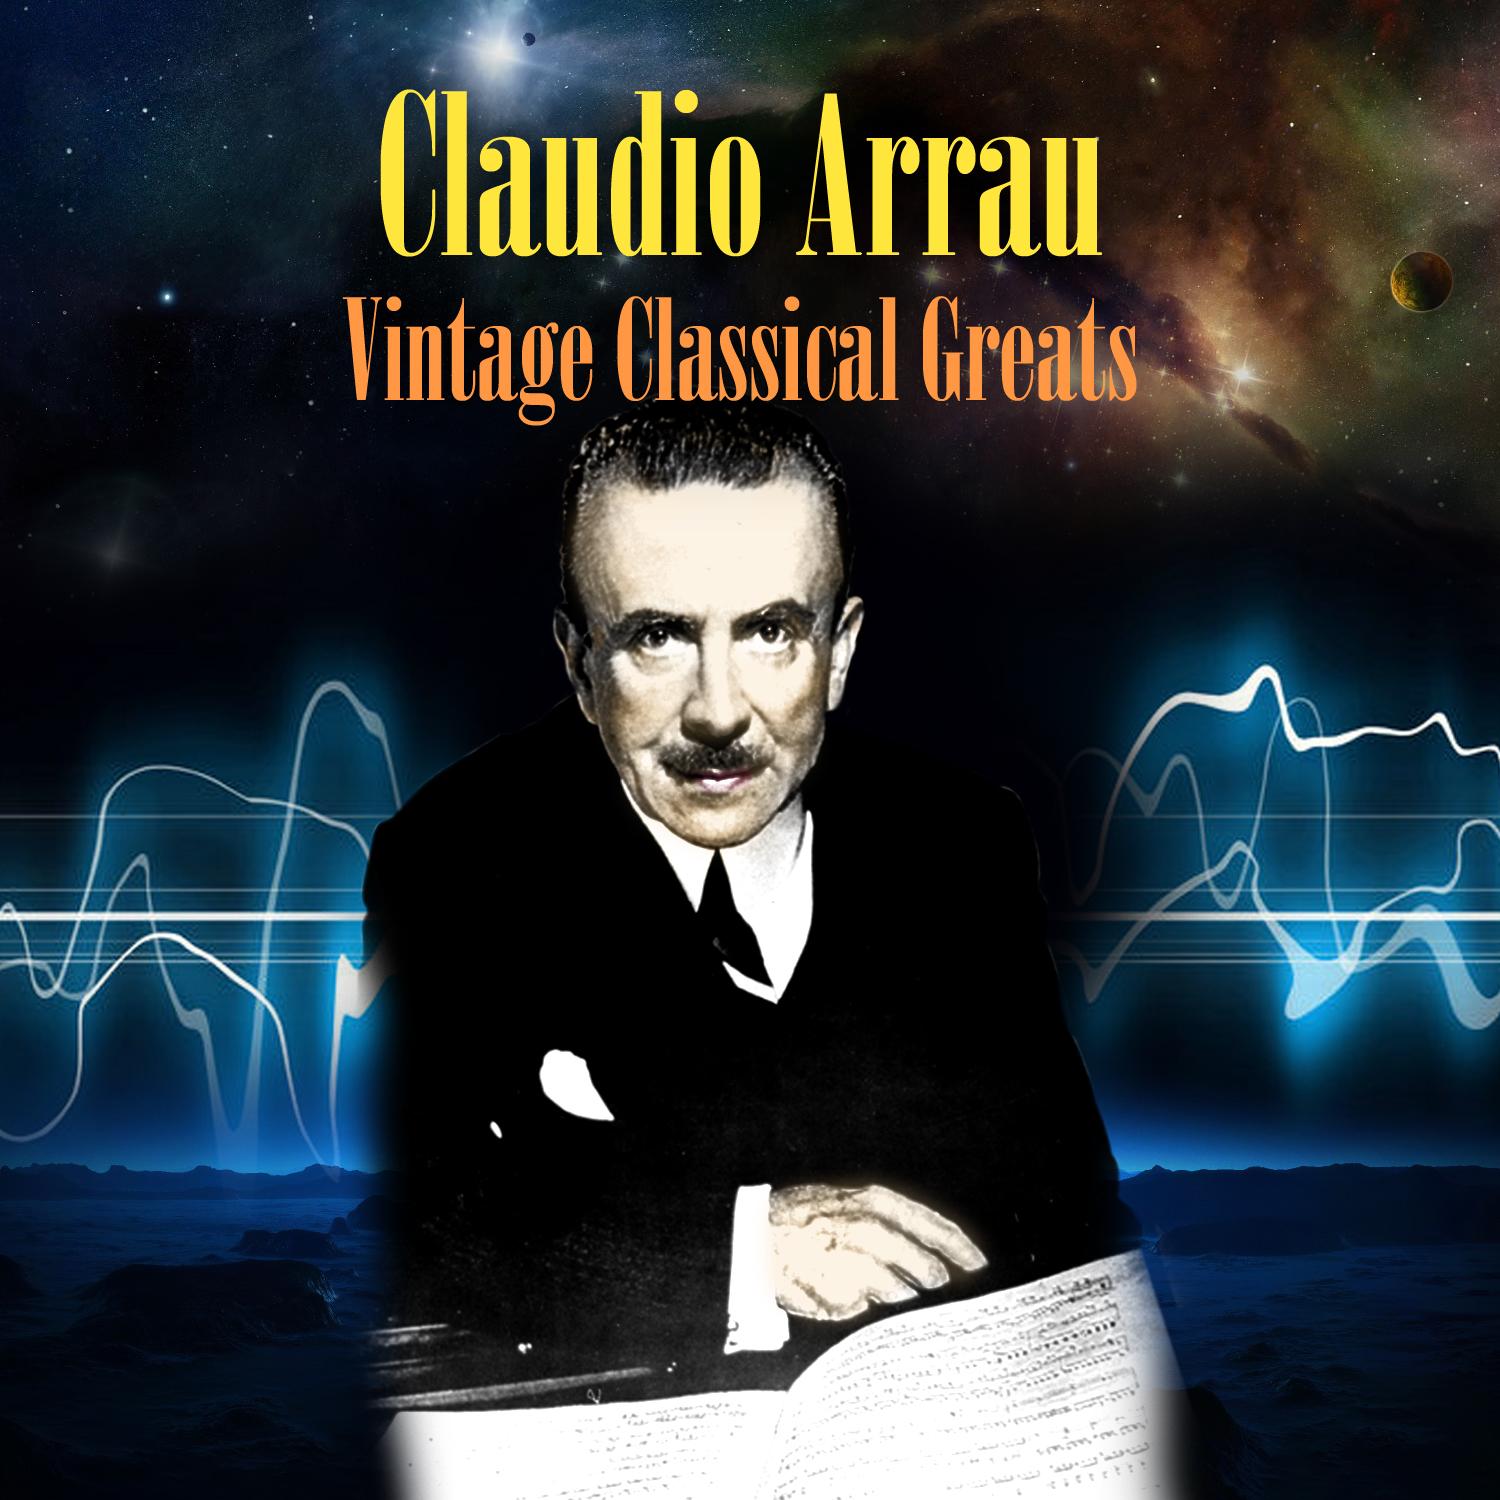 Vintage Classical Greats